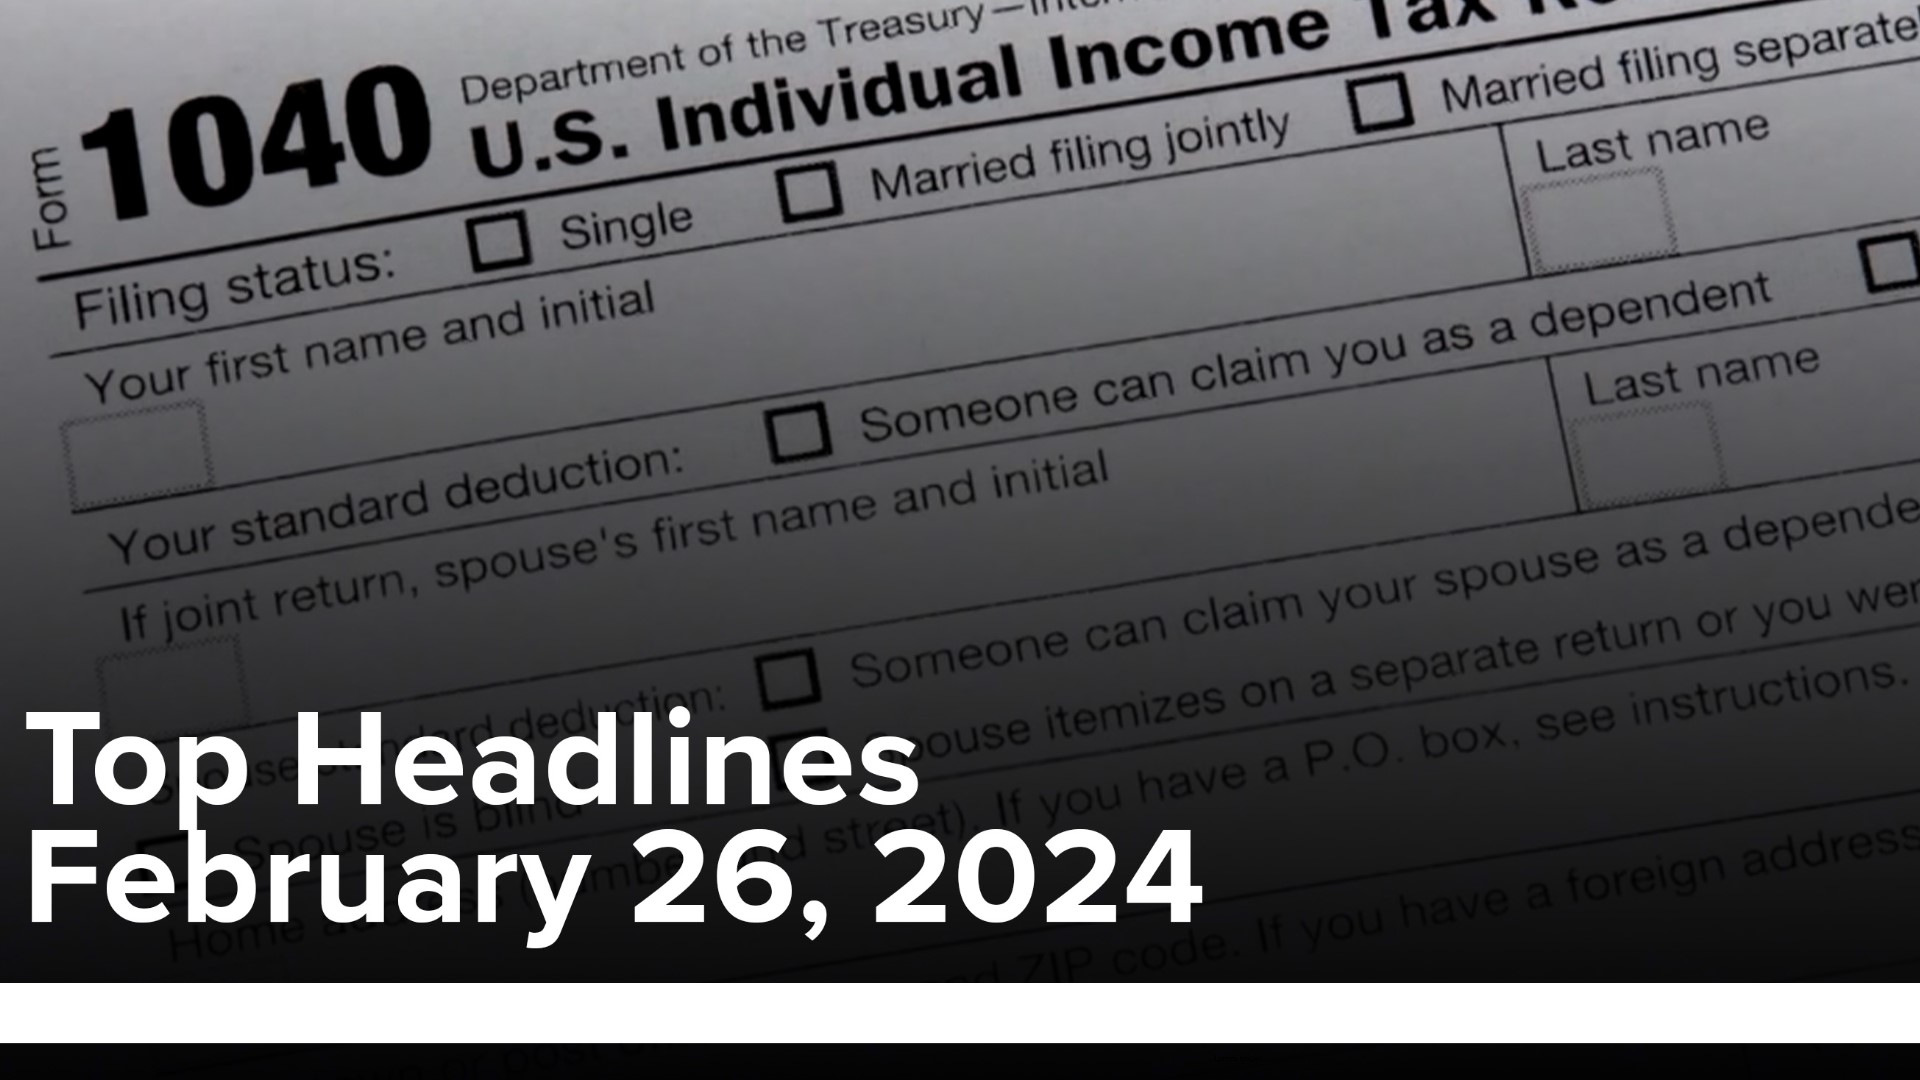 Watch today's top headlines to learn more about what to expect on your tax return this year.